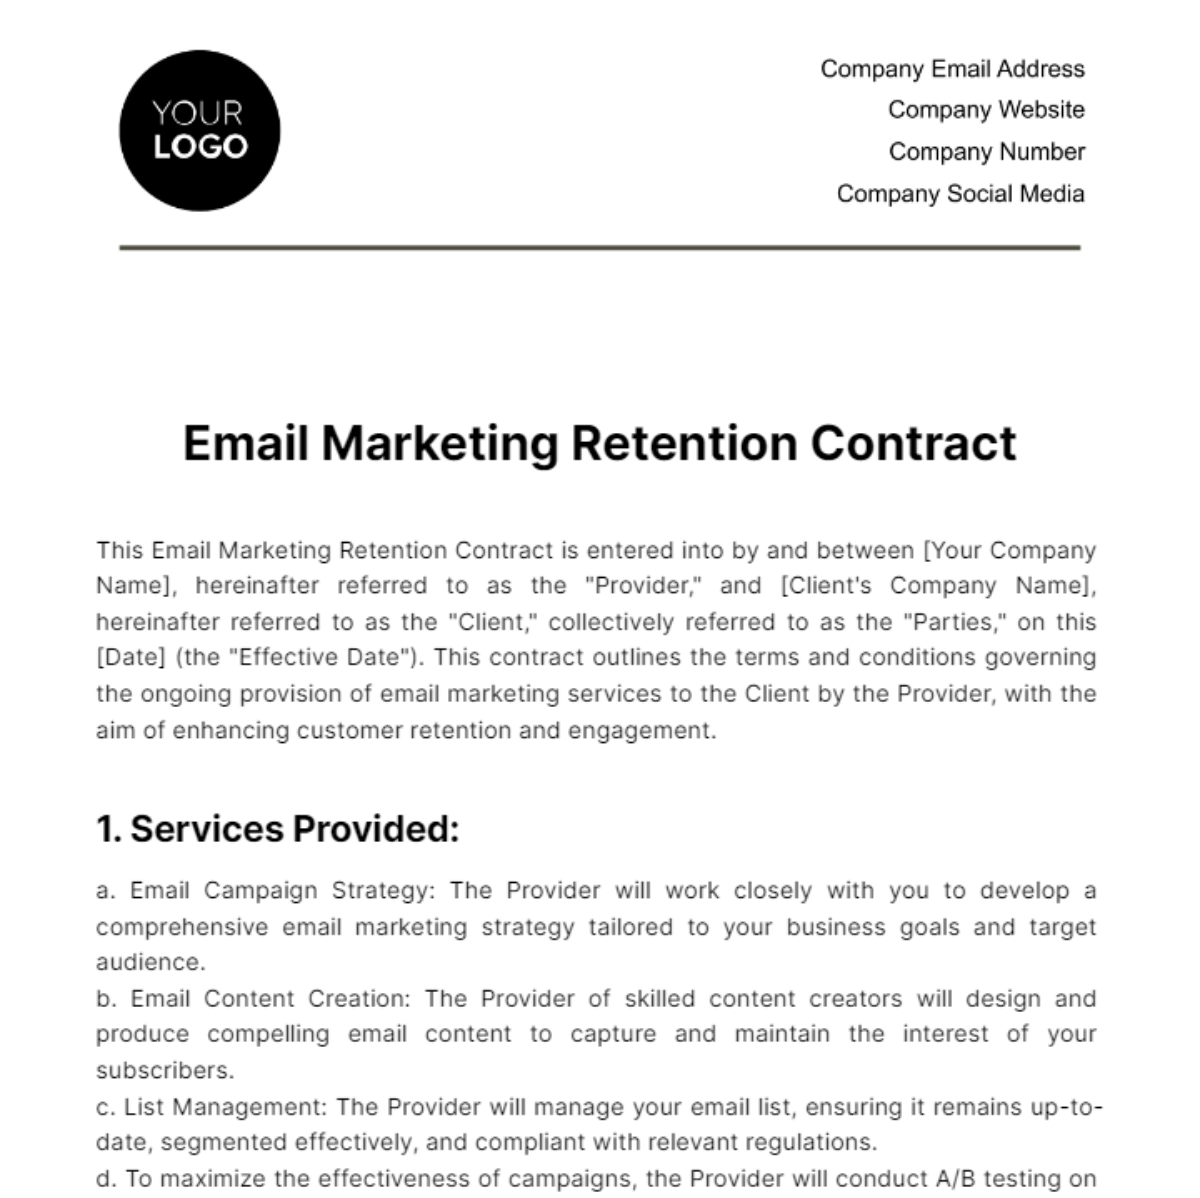 Email Marketing Retention Contract Template